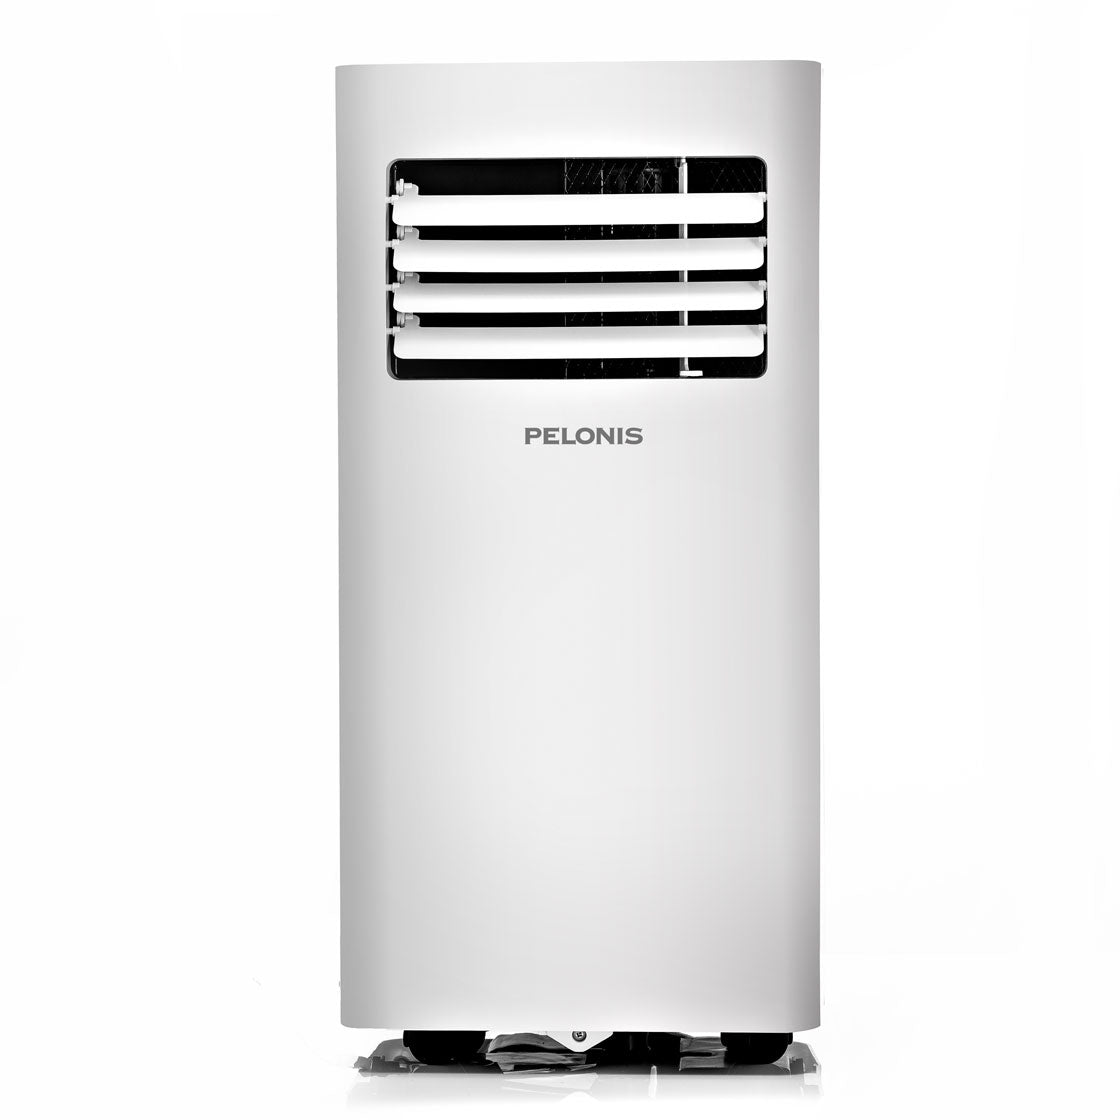 Pelonis 8,000 BTU 115-Volt 3-in-1 Portable Air Conditioner Dehumidifier and Fan Manufacturer RFB